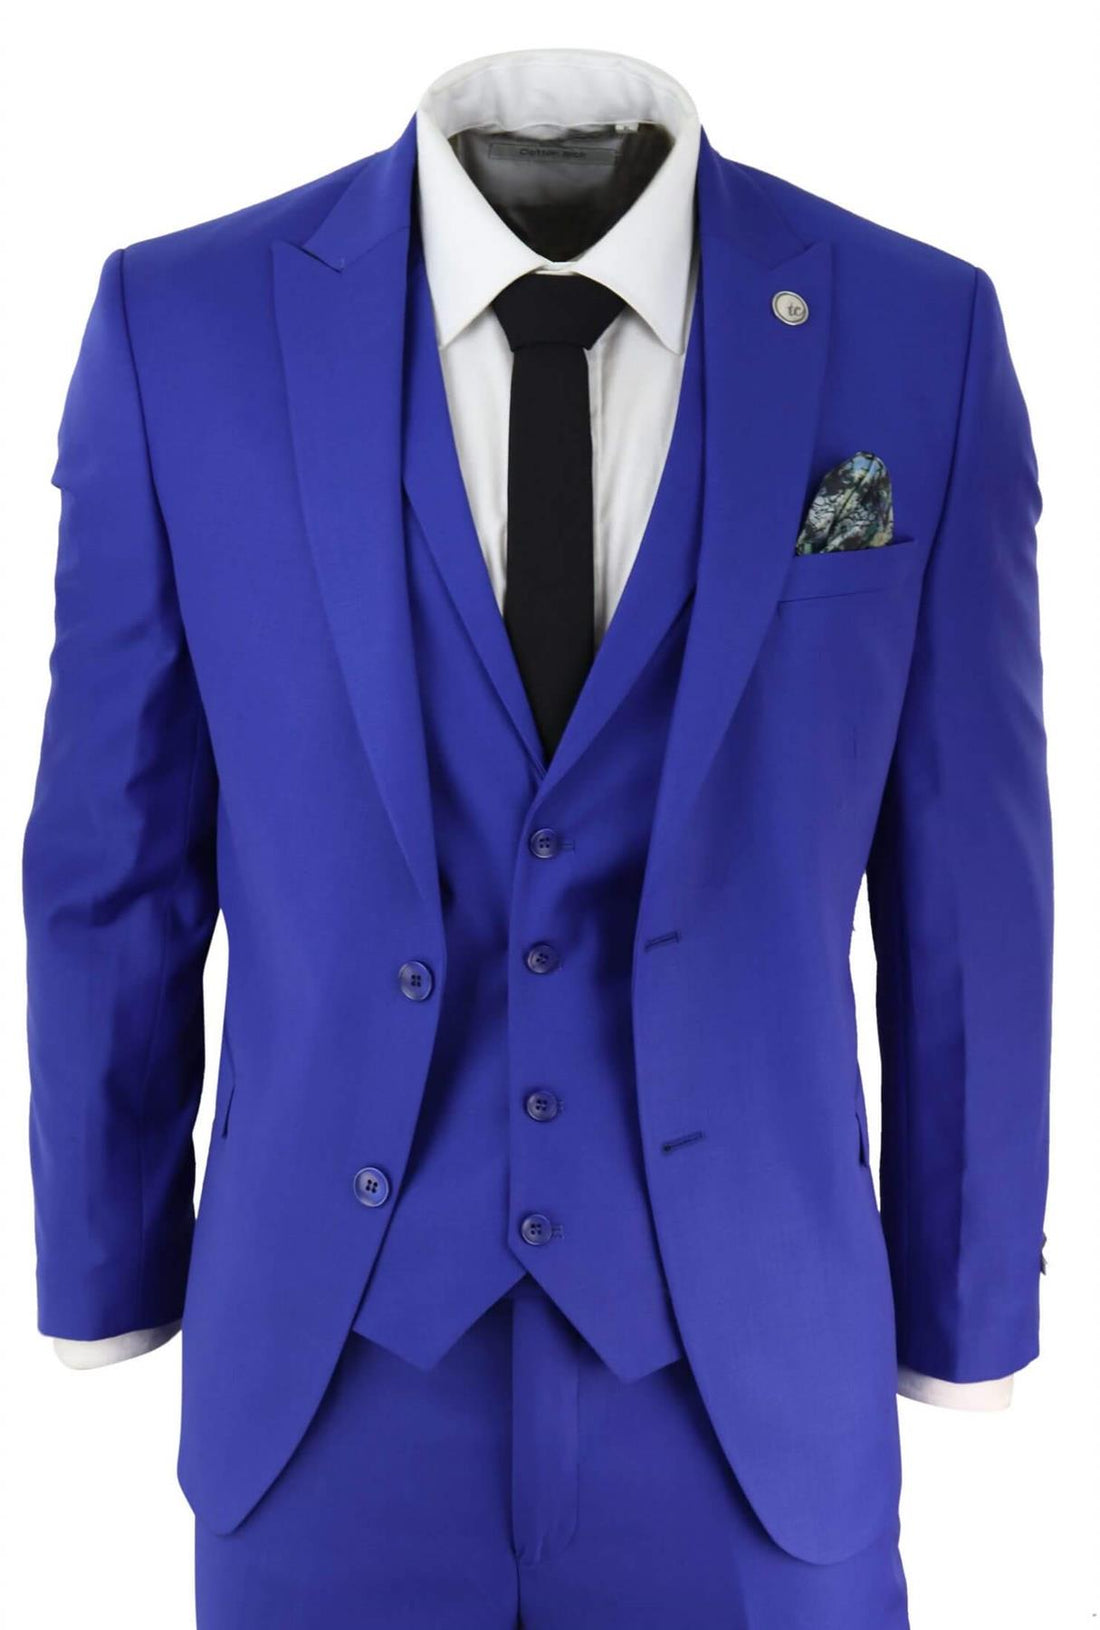 Mens 3 Piece Royal Blue Tailored Fit Complete Suit Best Man Groom Prom Wedding - Upperclass Fashions 